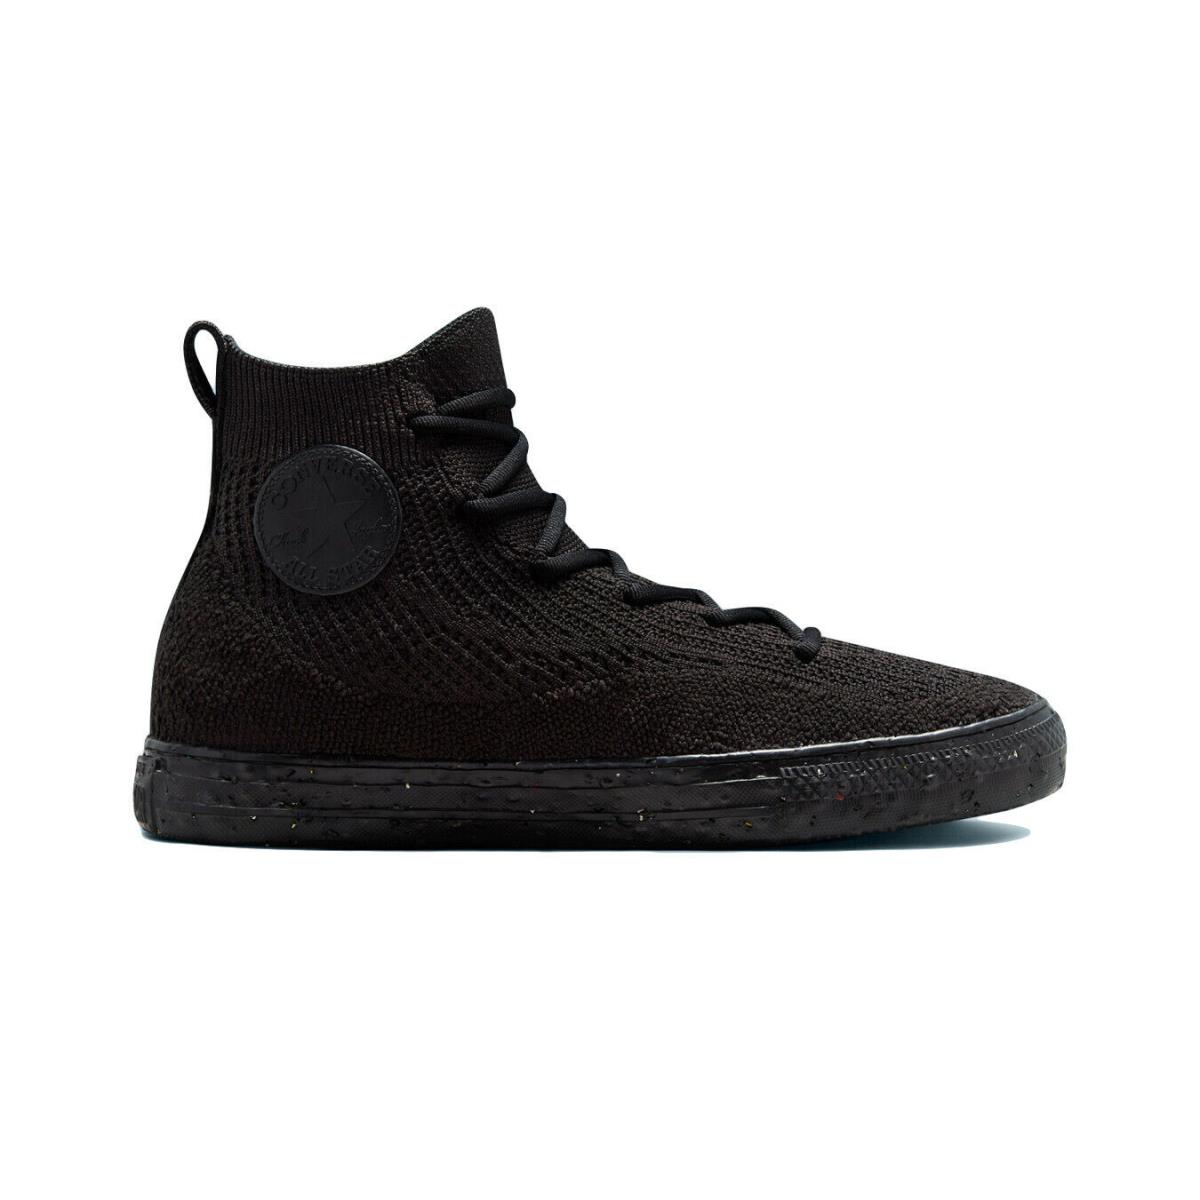 Converse Chuck Taylor All Star Crater 172031C Men Black Lime Twist Shoes AMRS475 7.5